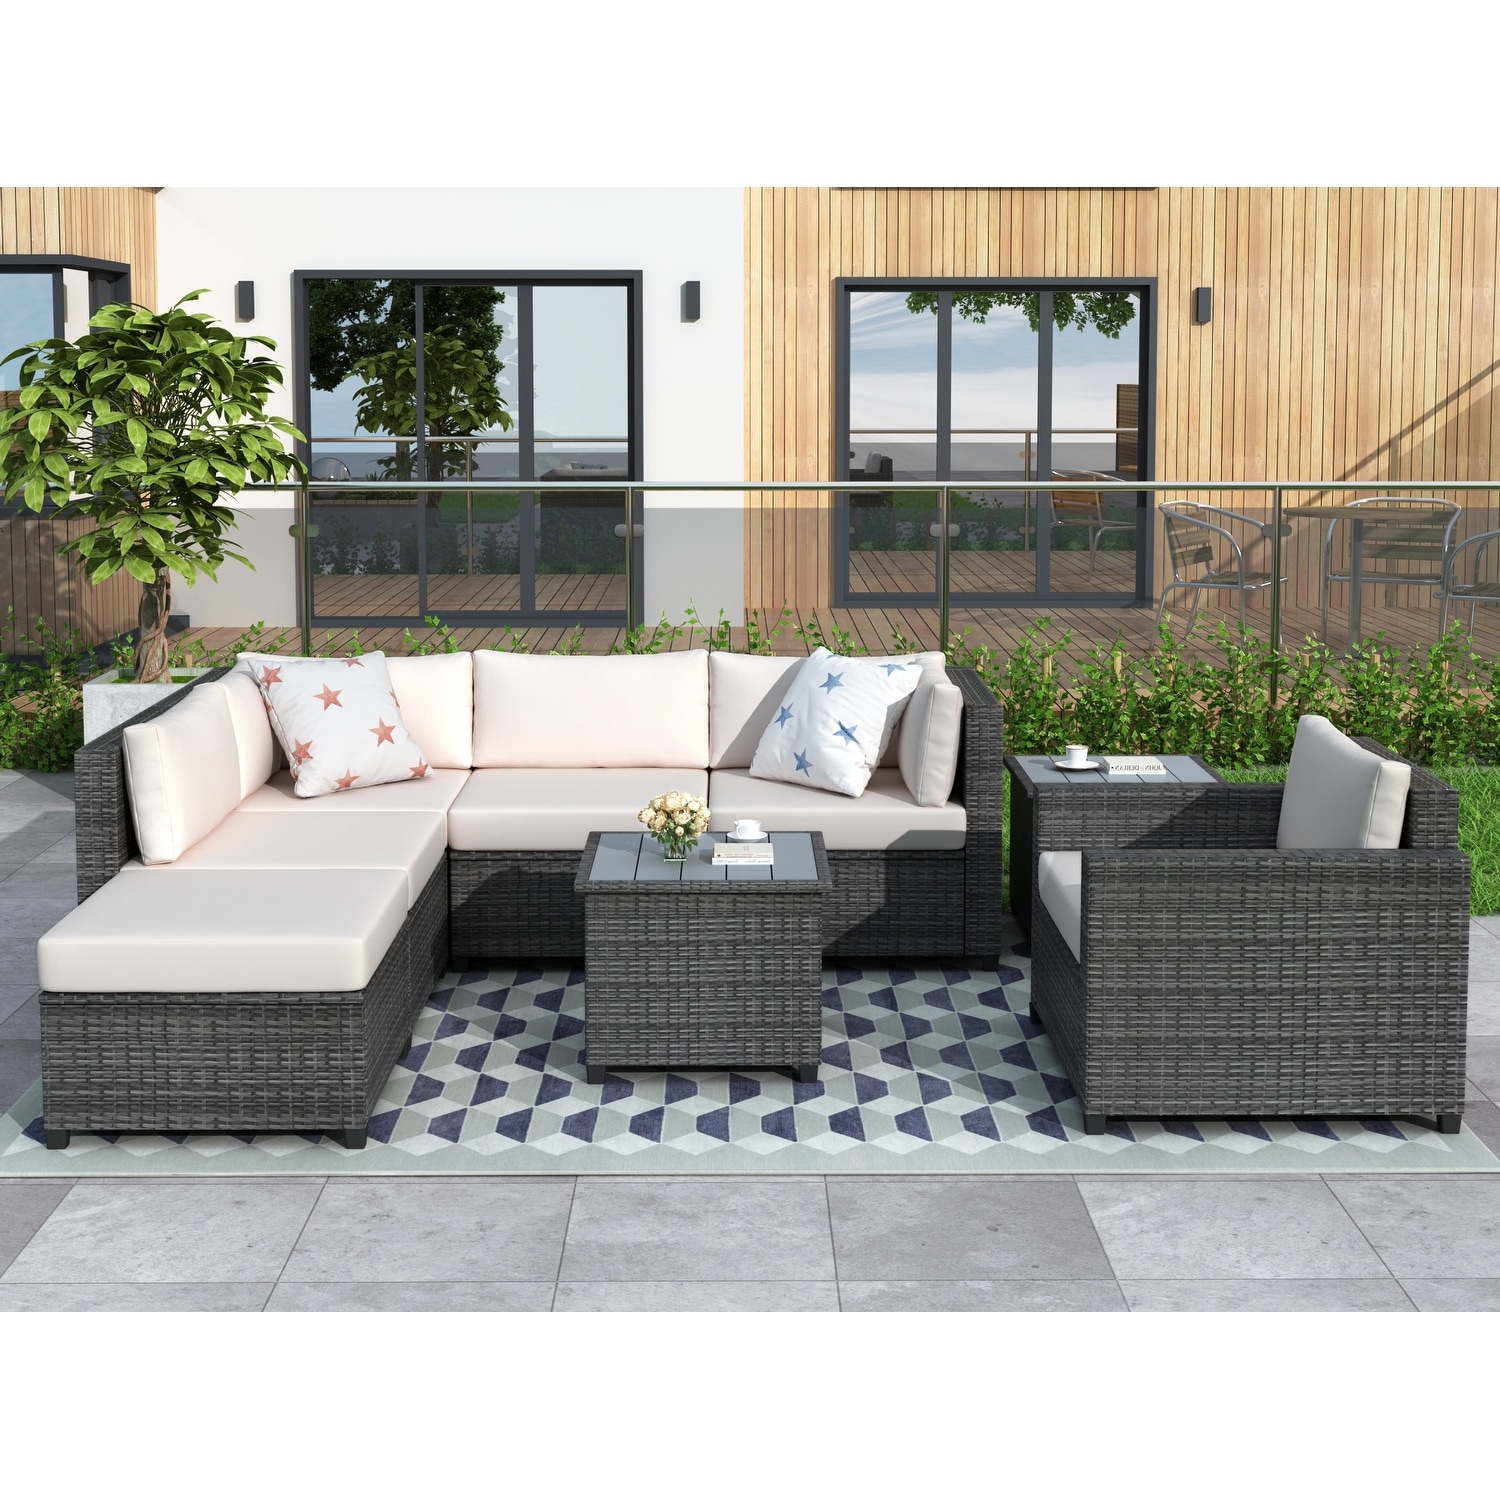 Malwee 8 Pieces Patio Furniture Set  Outdoor Furniture Patio Sectional Sofa all Weather Rattan Outdoor Sectional With Cushion